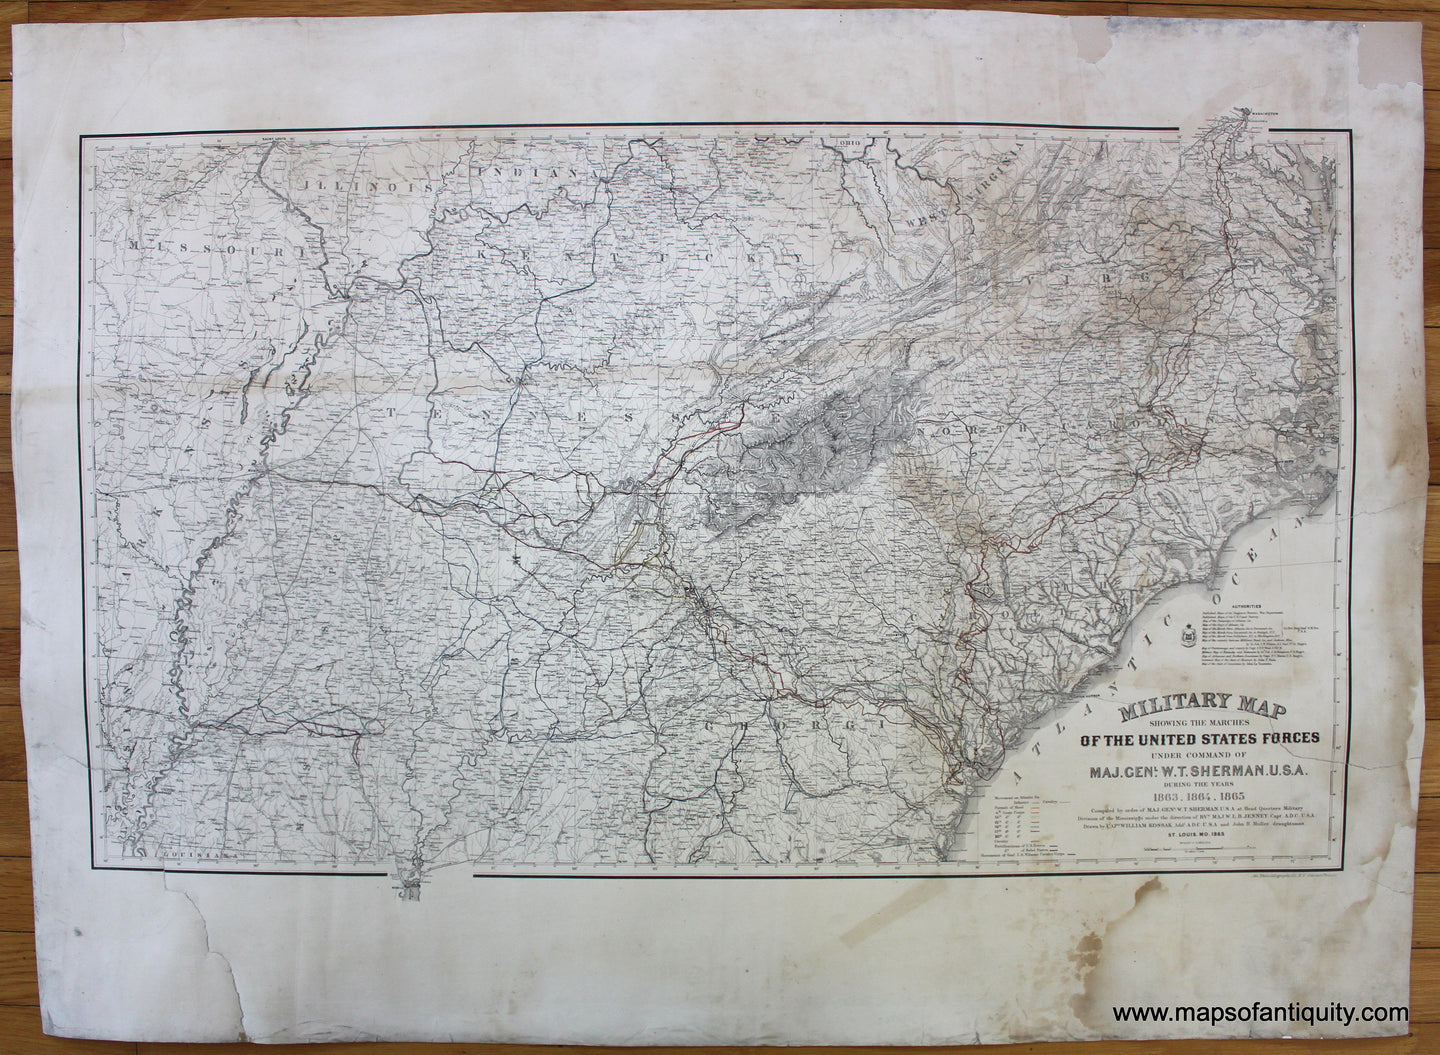 Antique-Map-Military-Map-Showing-the-Marches-of-the-United-States-Forces-under-the-Command-of-Maj.-Gen.-W.T.-Sherman-U.S.A.-during-the-years-1863-1864-1865-Kossak-US-War-Dept-Civil-War